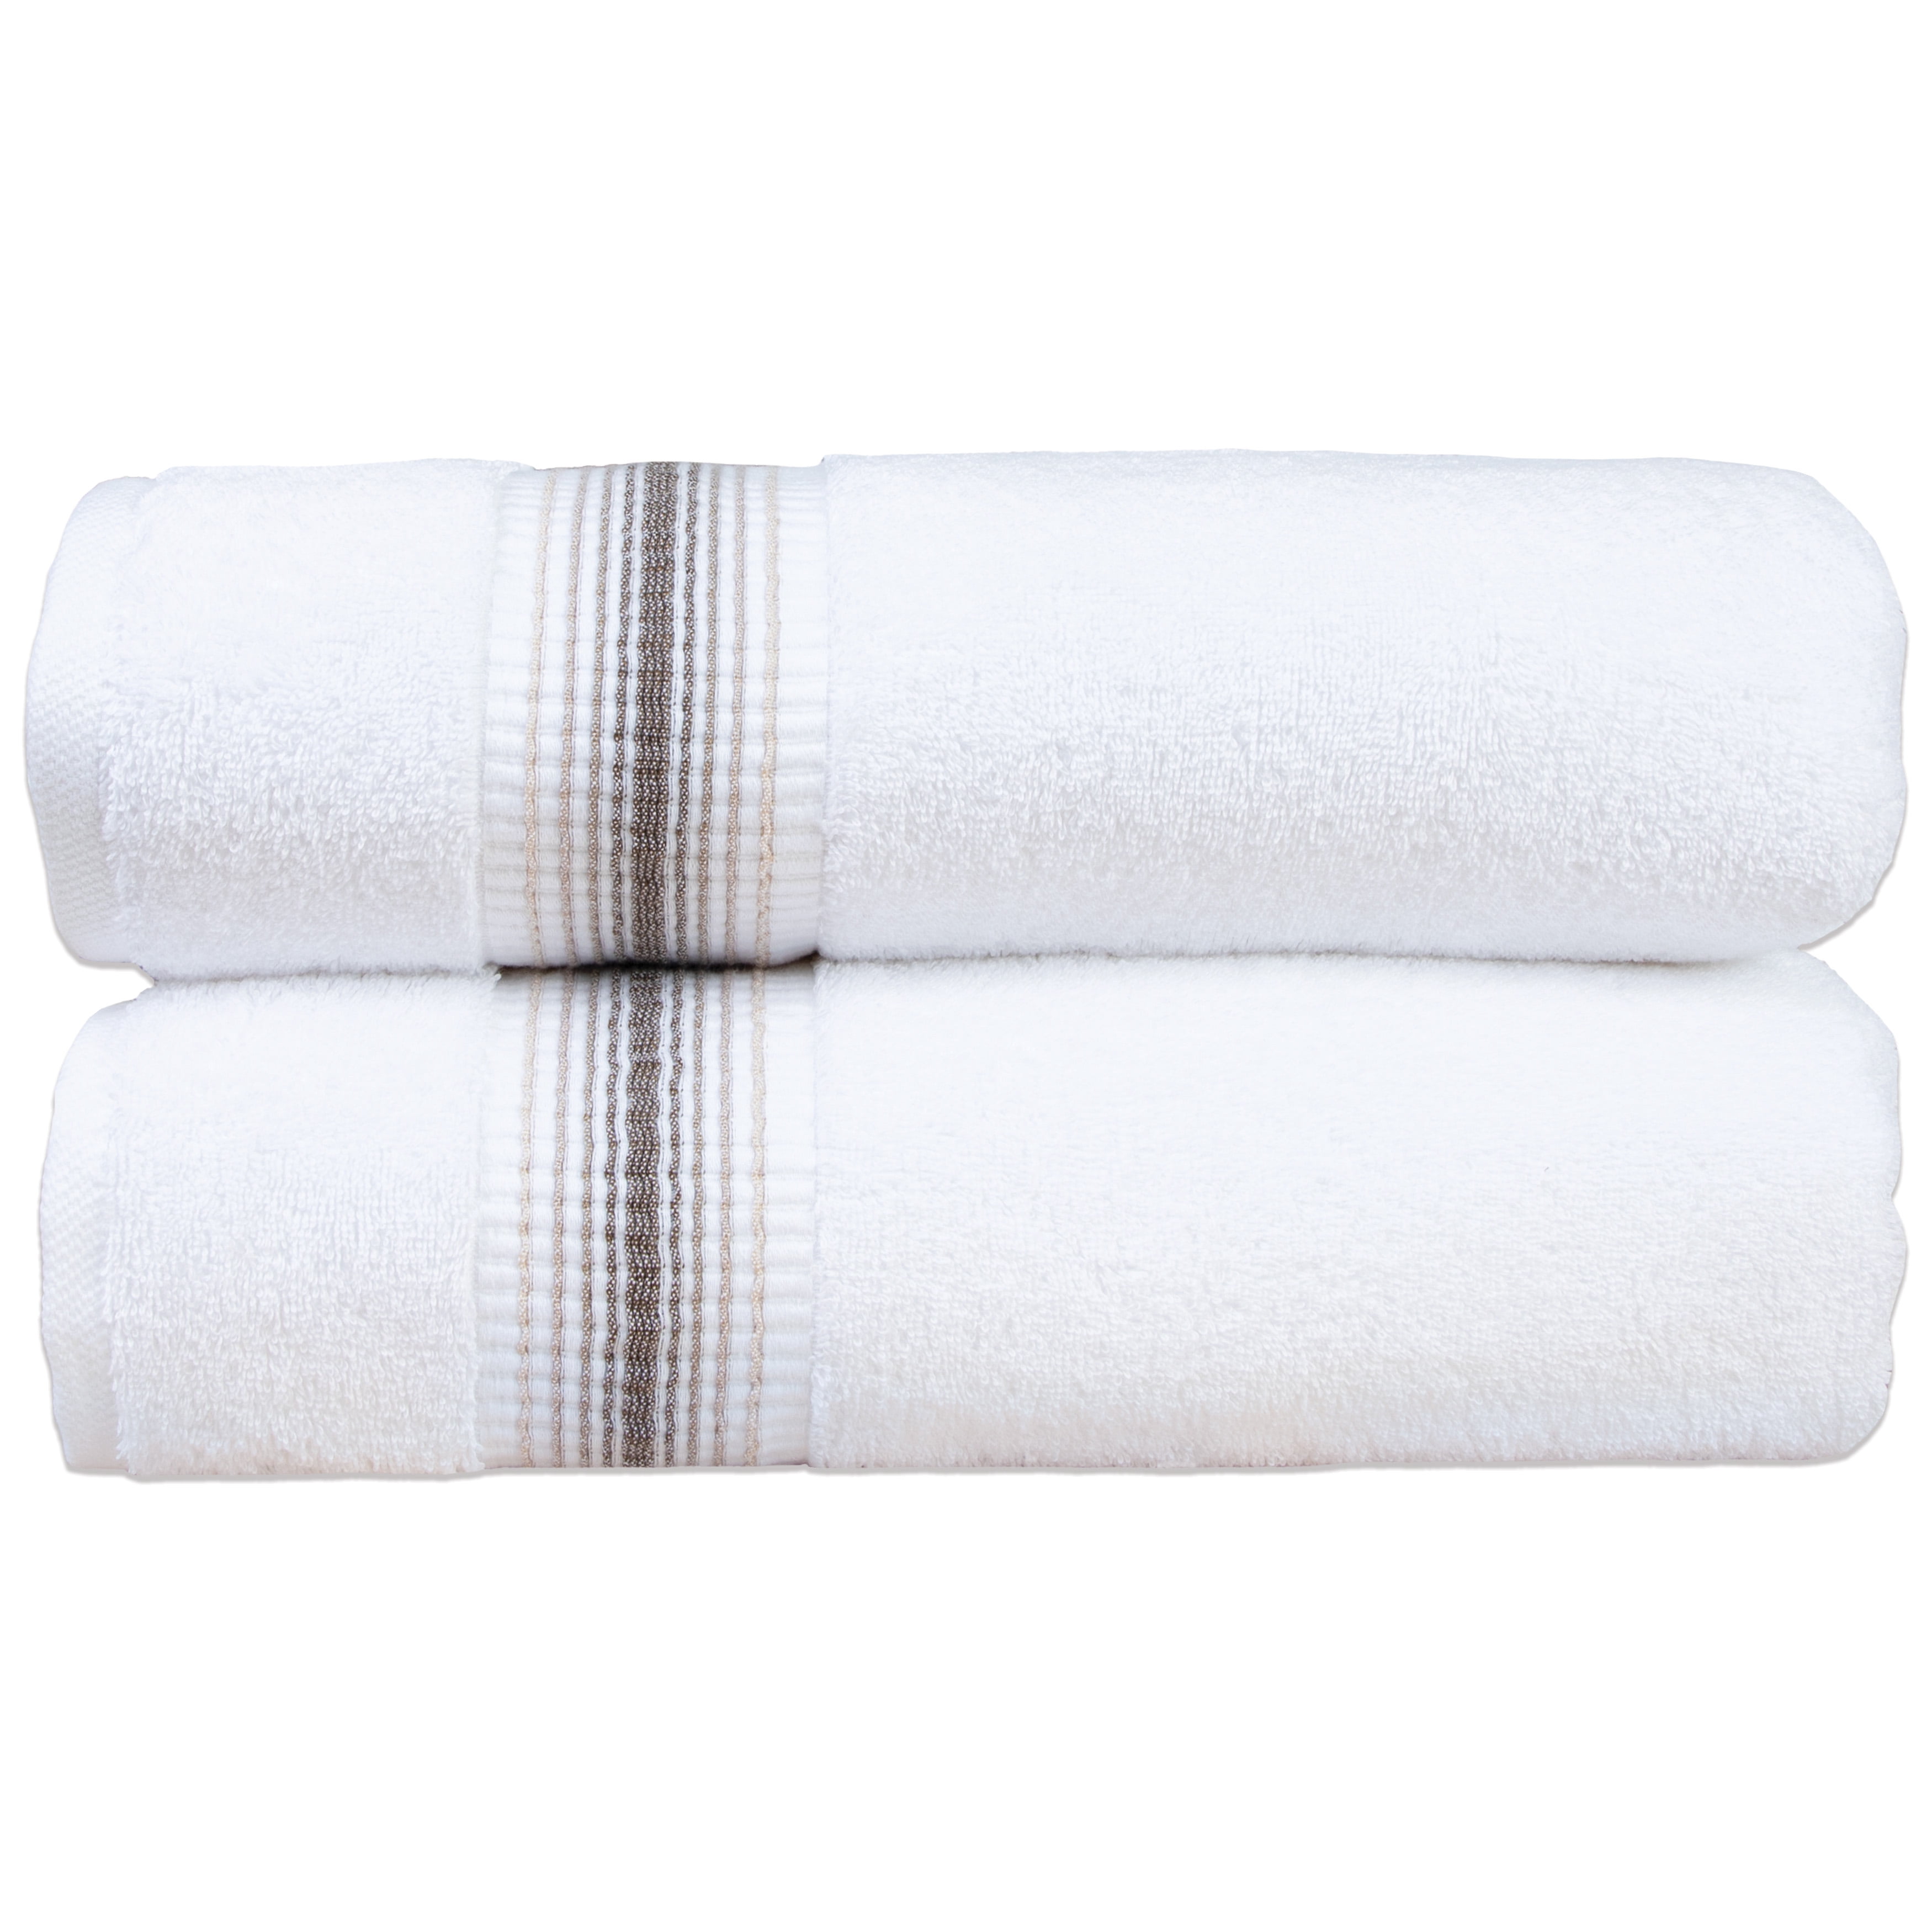 LUXURY STRIPED HOTEL QUALITY 100% EGYPTIAN COTTON SOFT WHITE HAND TOWEL 600GSM 